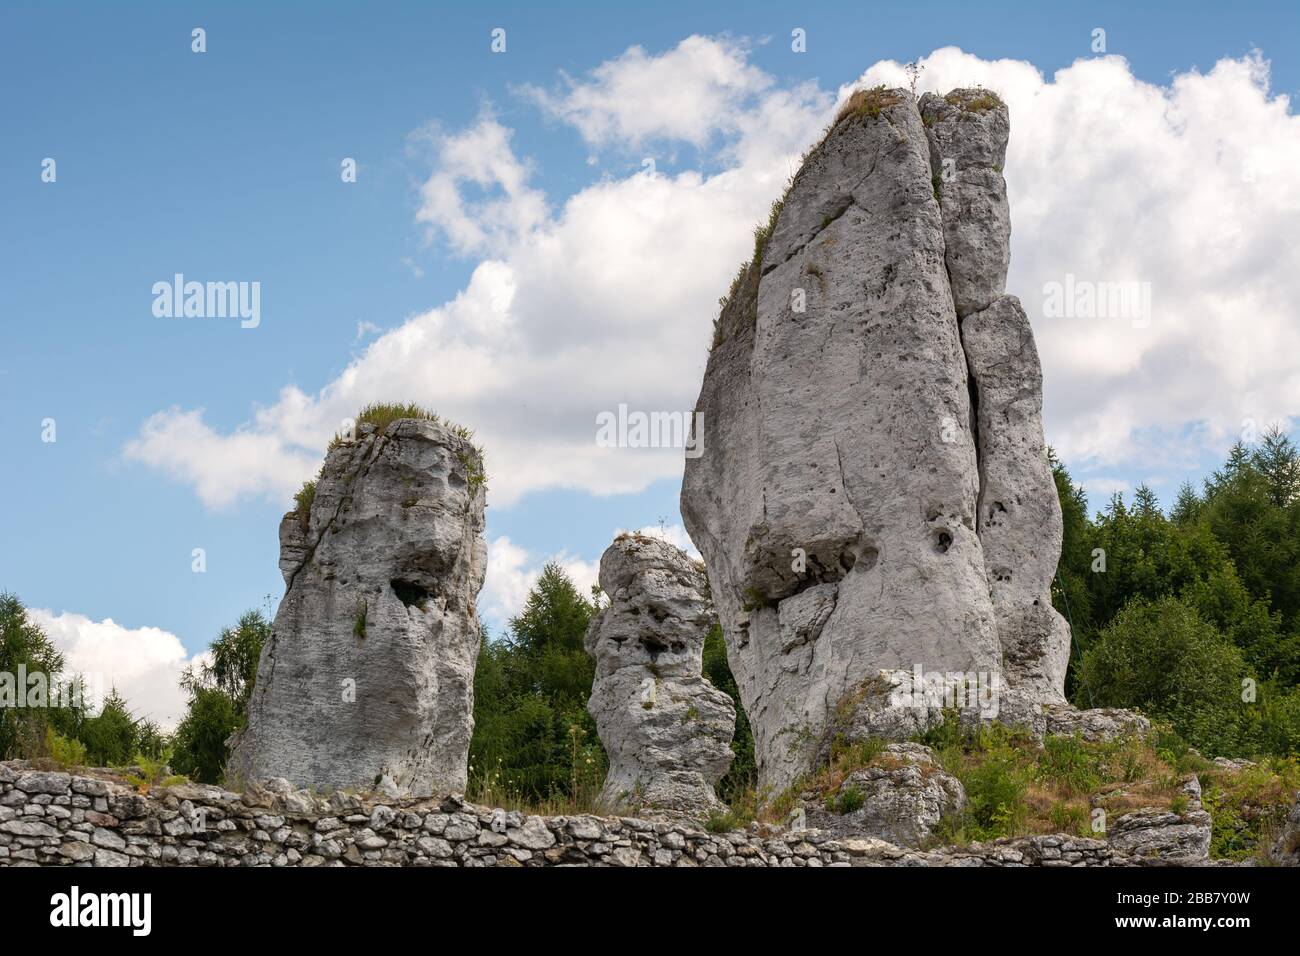 Limestone rocks in tThe Cracow-Czestochowa Upland - a geographical region located in southern Poland Stock Photo